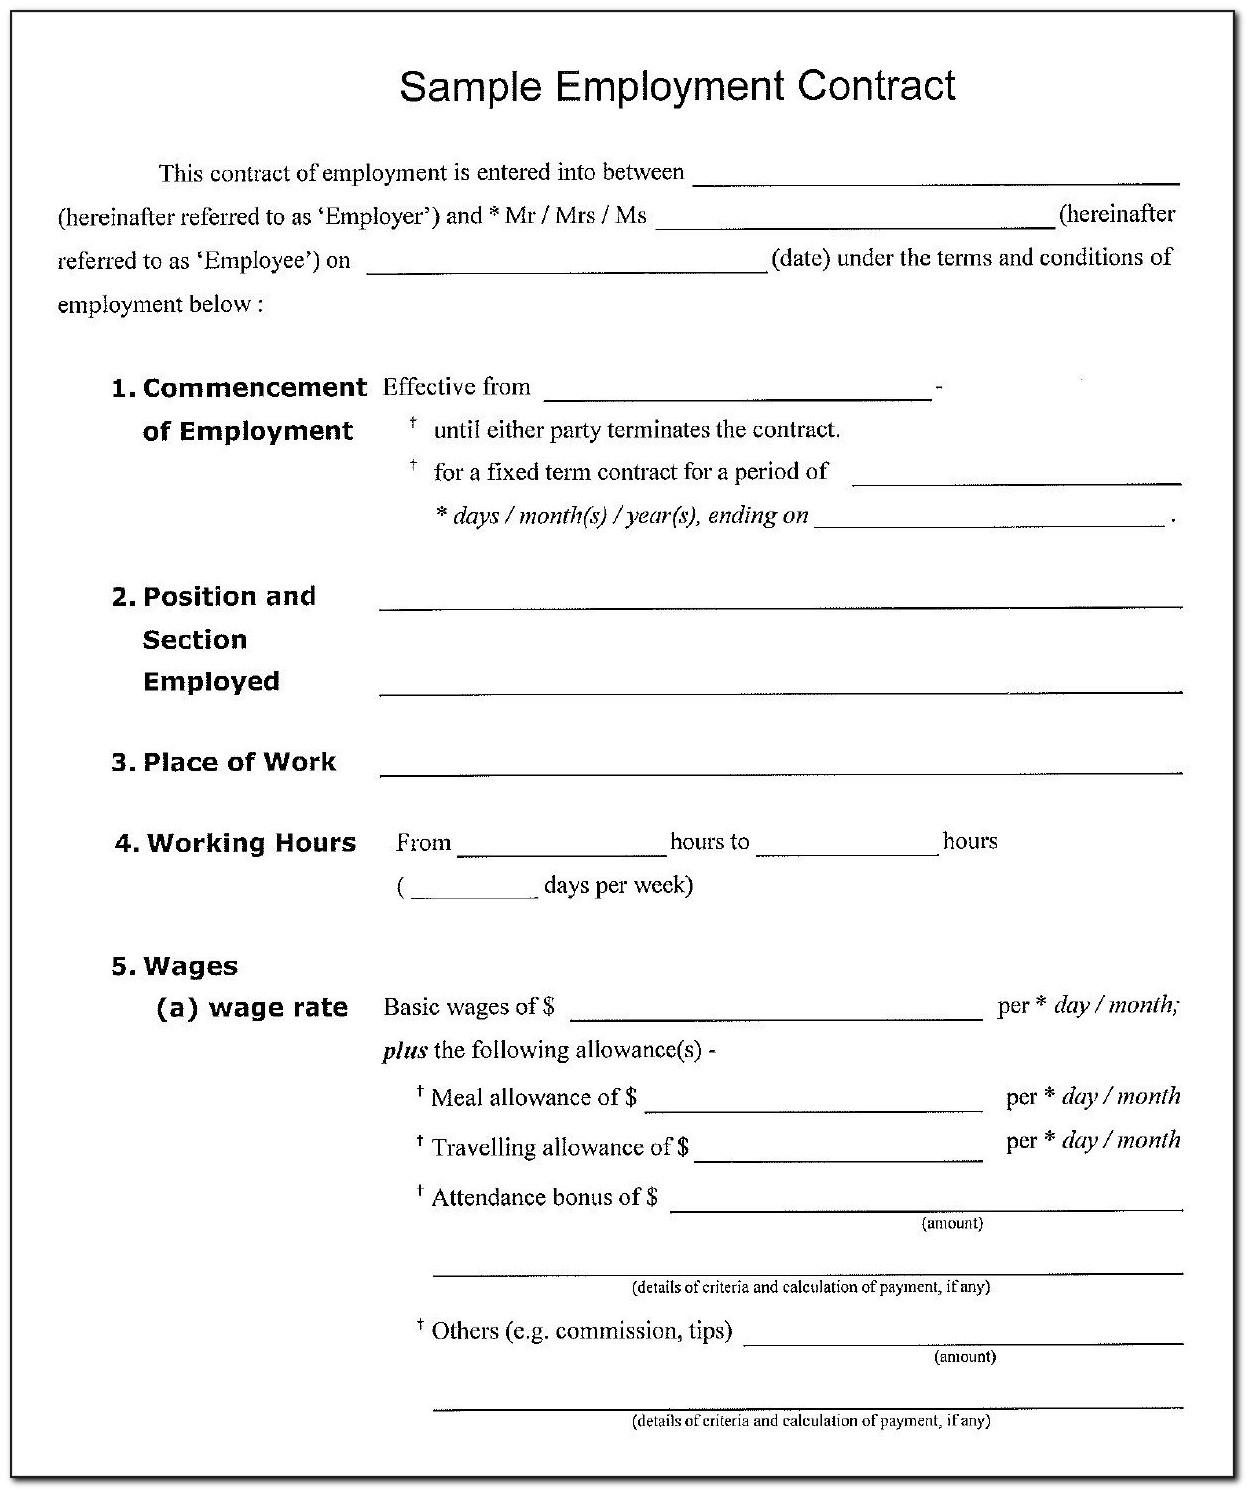 Simple Employment Contract Template Uk